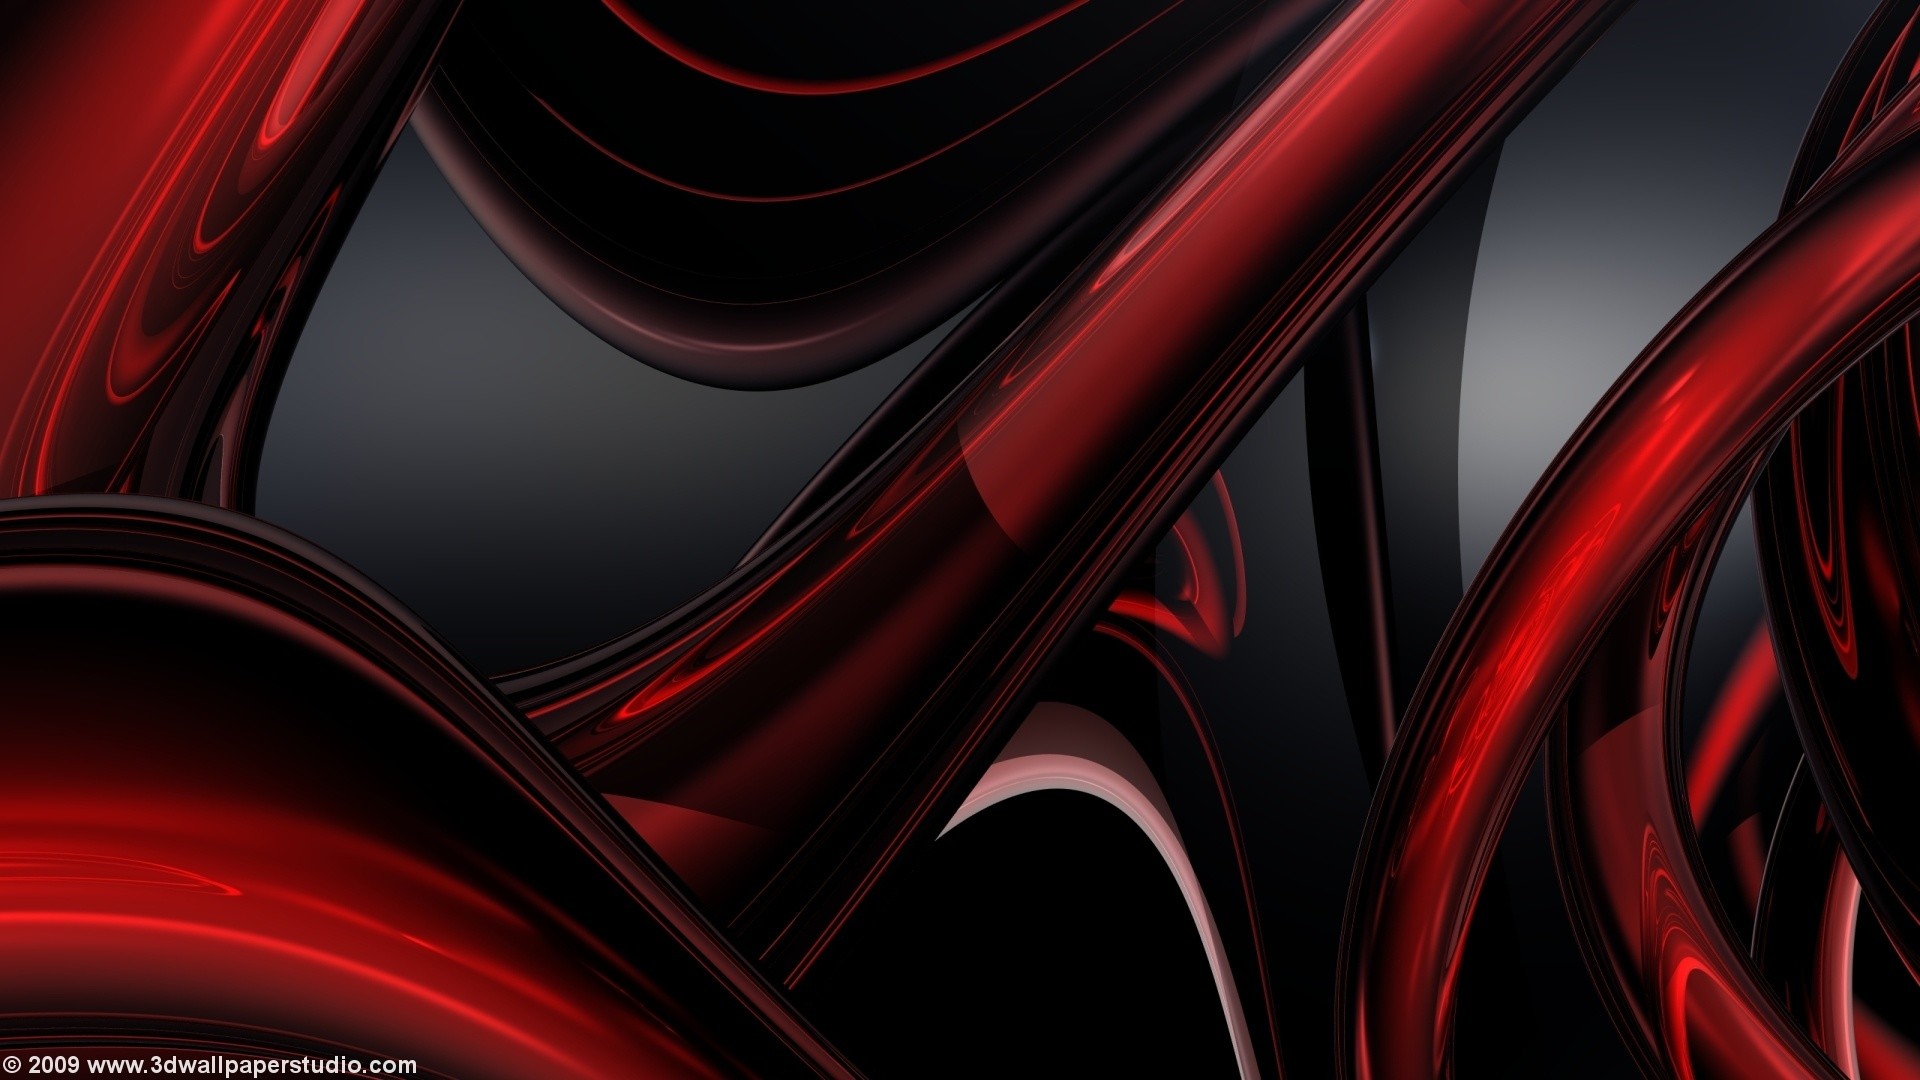 Red Abstract Desktop Backgrounds